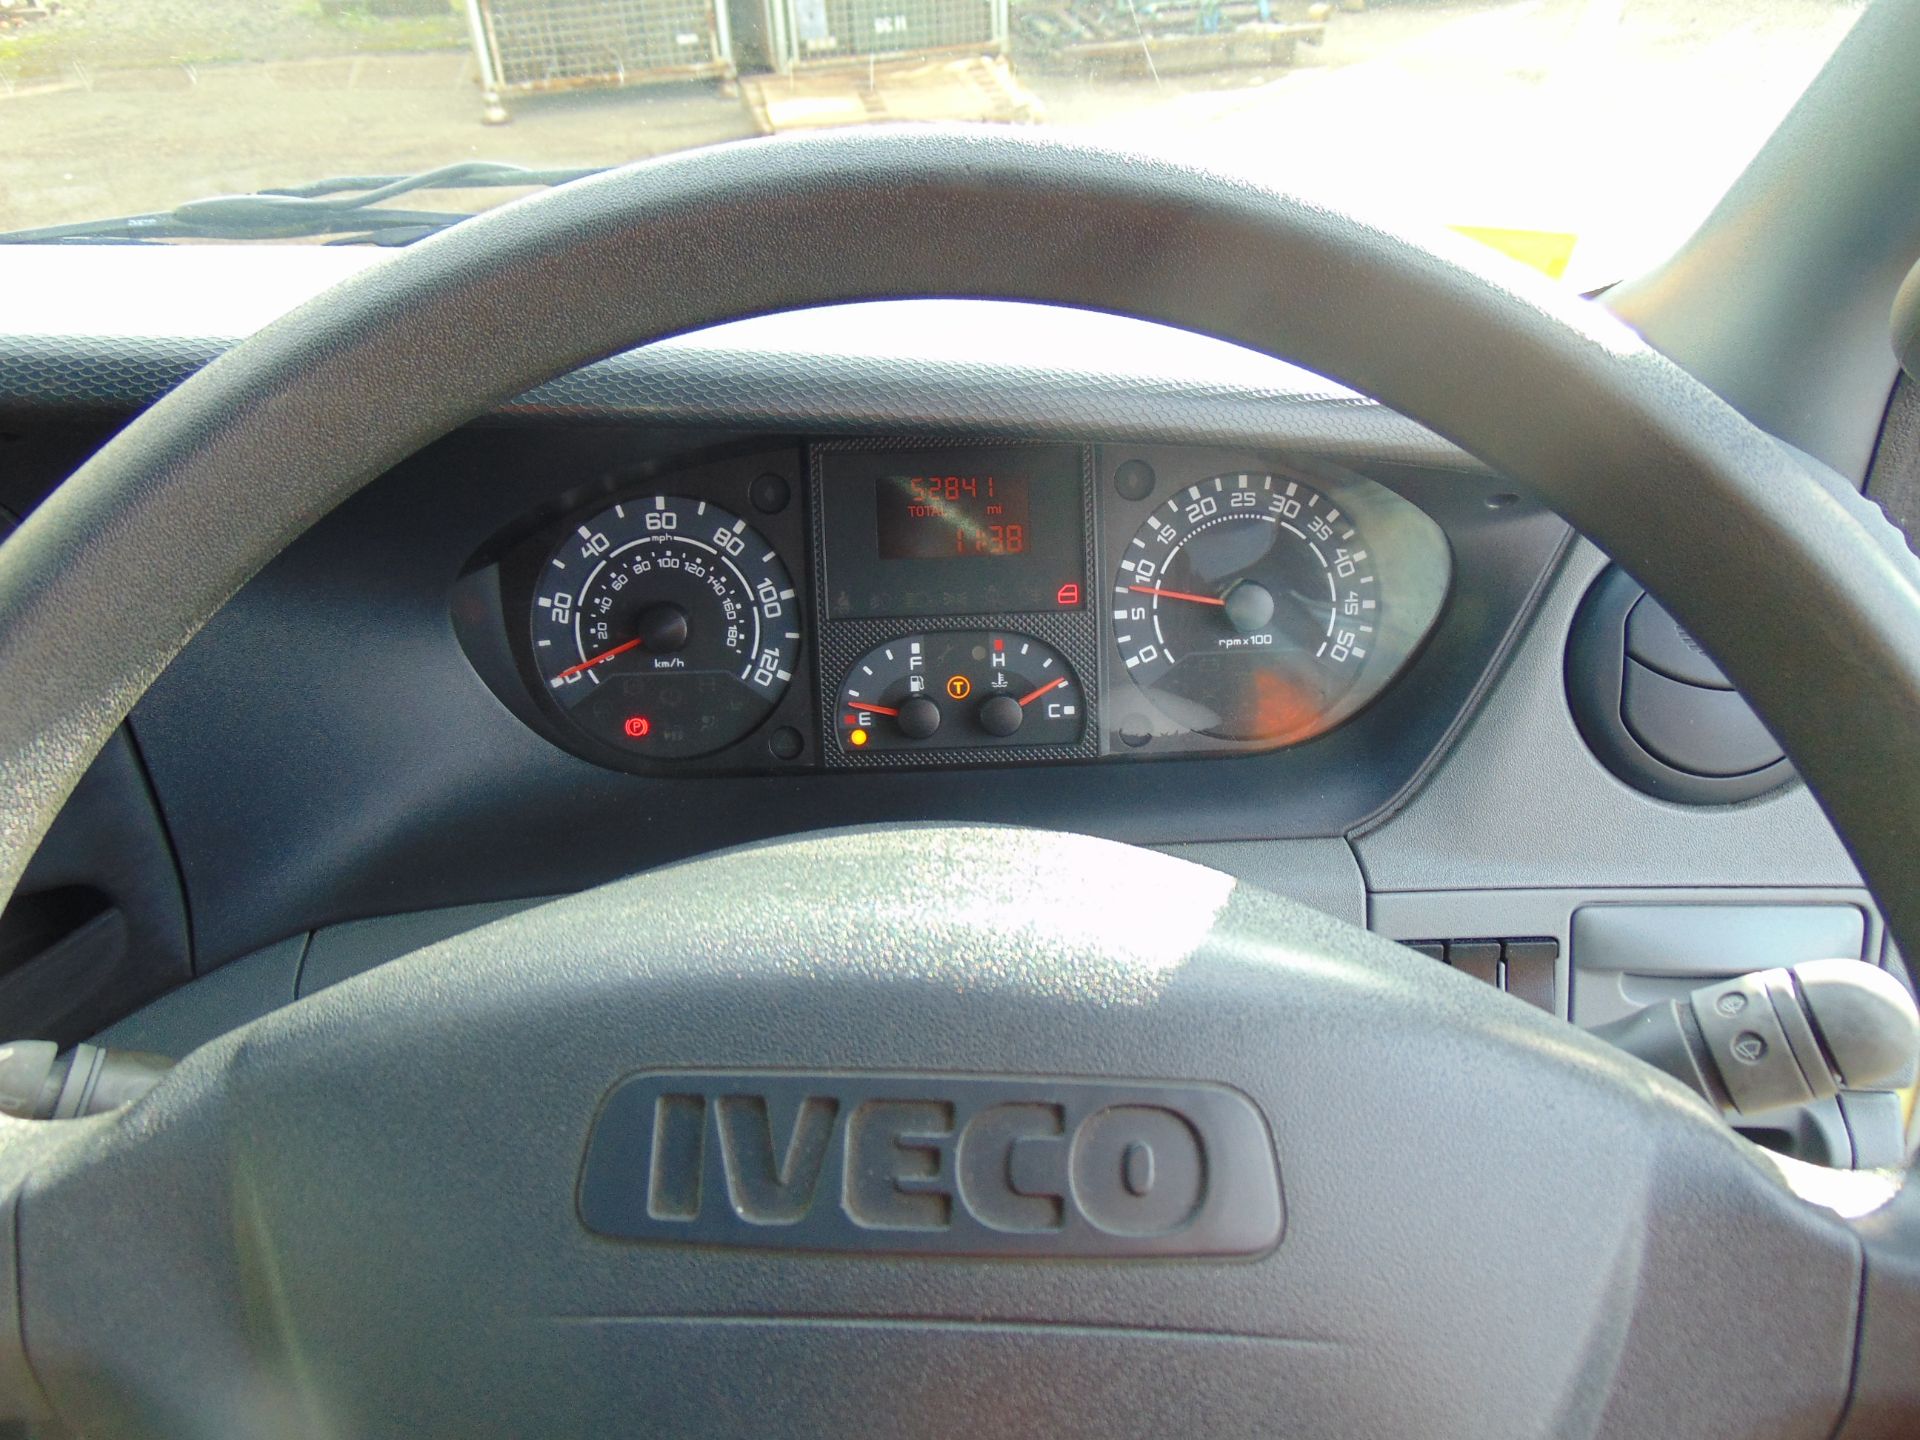 2008 Iveco Daily 65C18V 3.0 HPT Long Wheel Base High roof panel van - Image 23 of 28